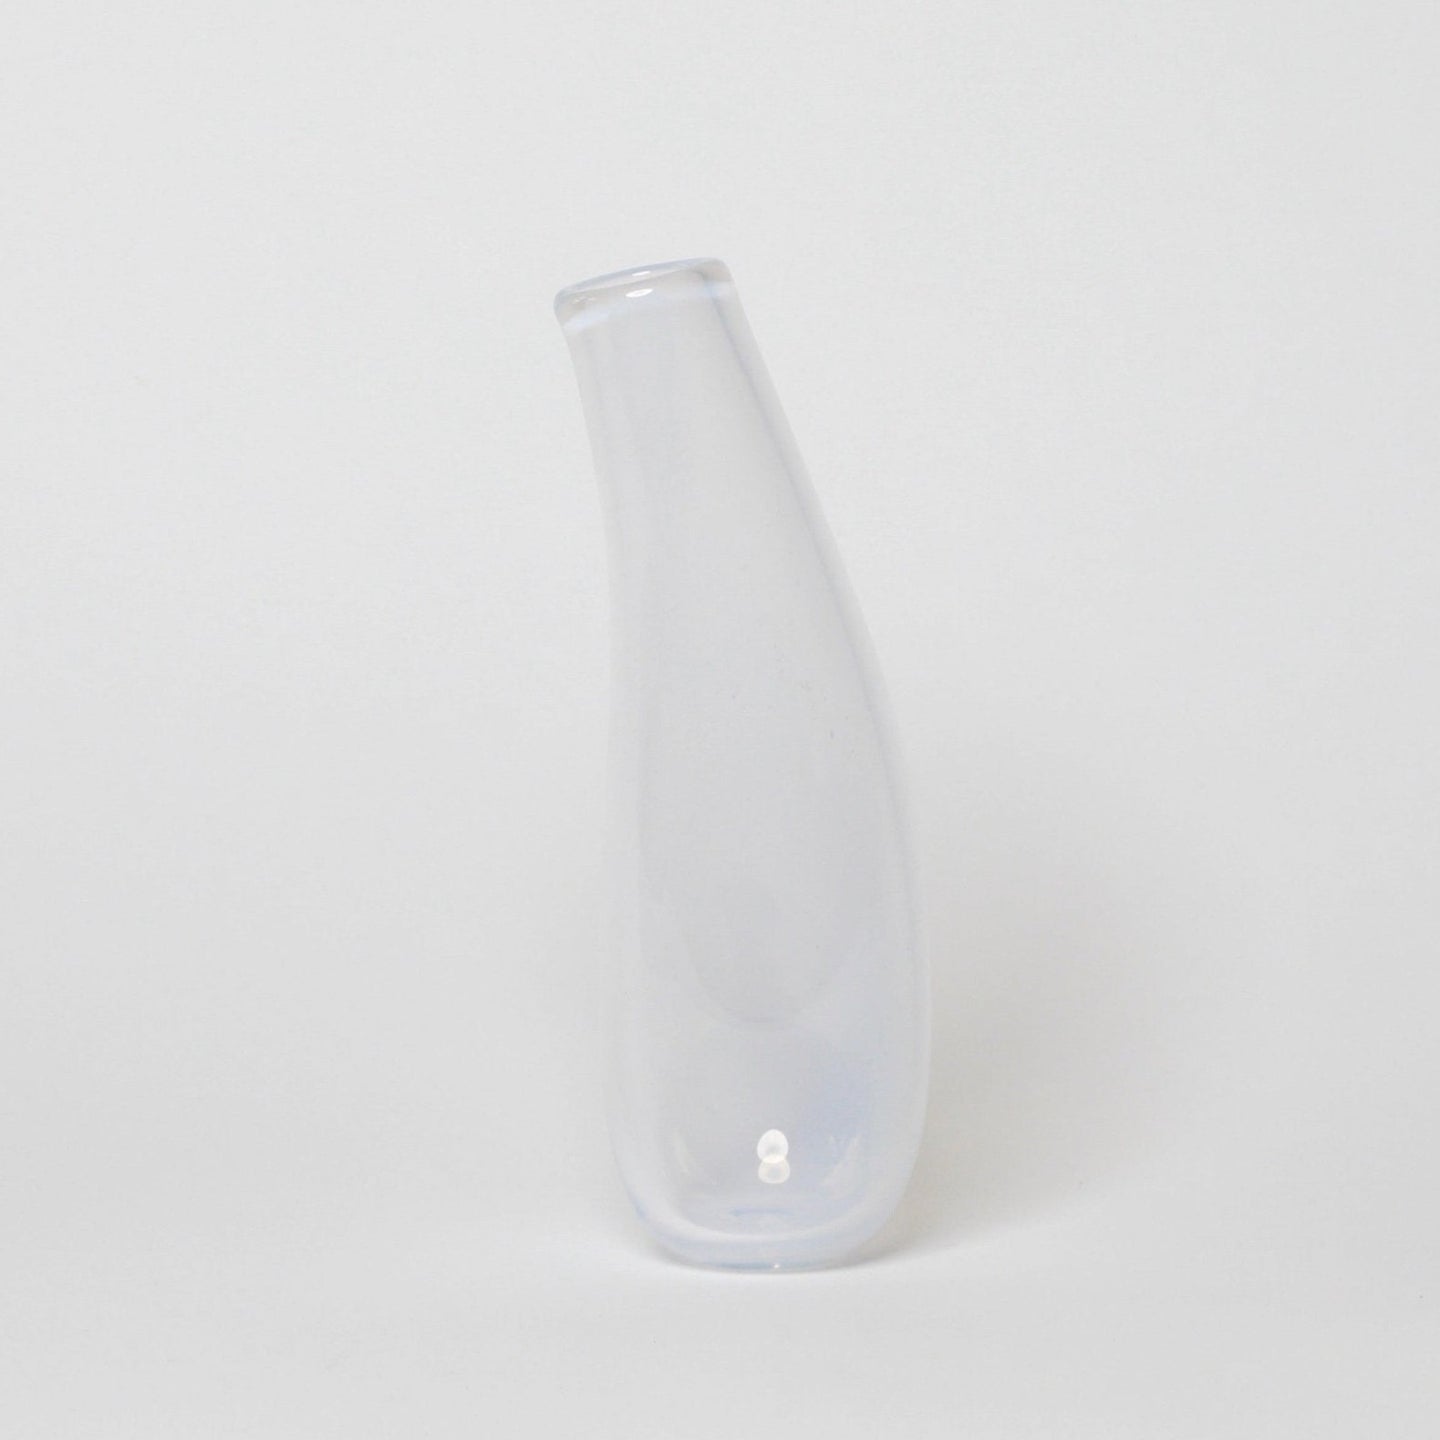 Opaline Bone Vase 22 | made from animal bones - THE HOME OF SUSTAINABLE THINGS